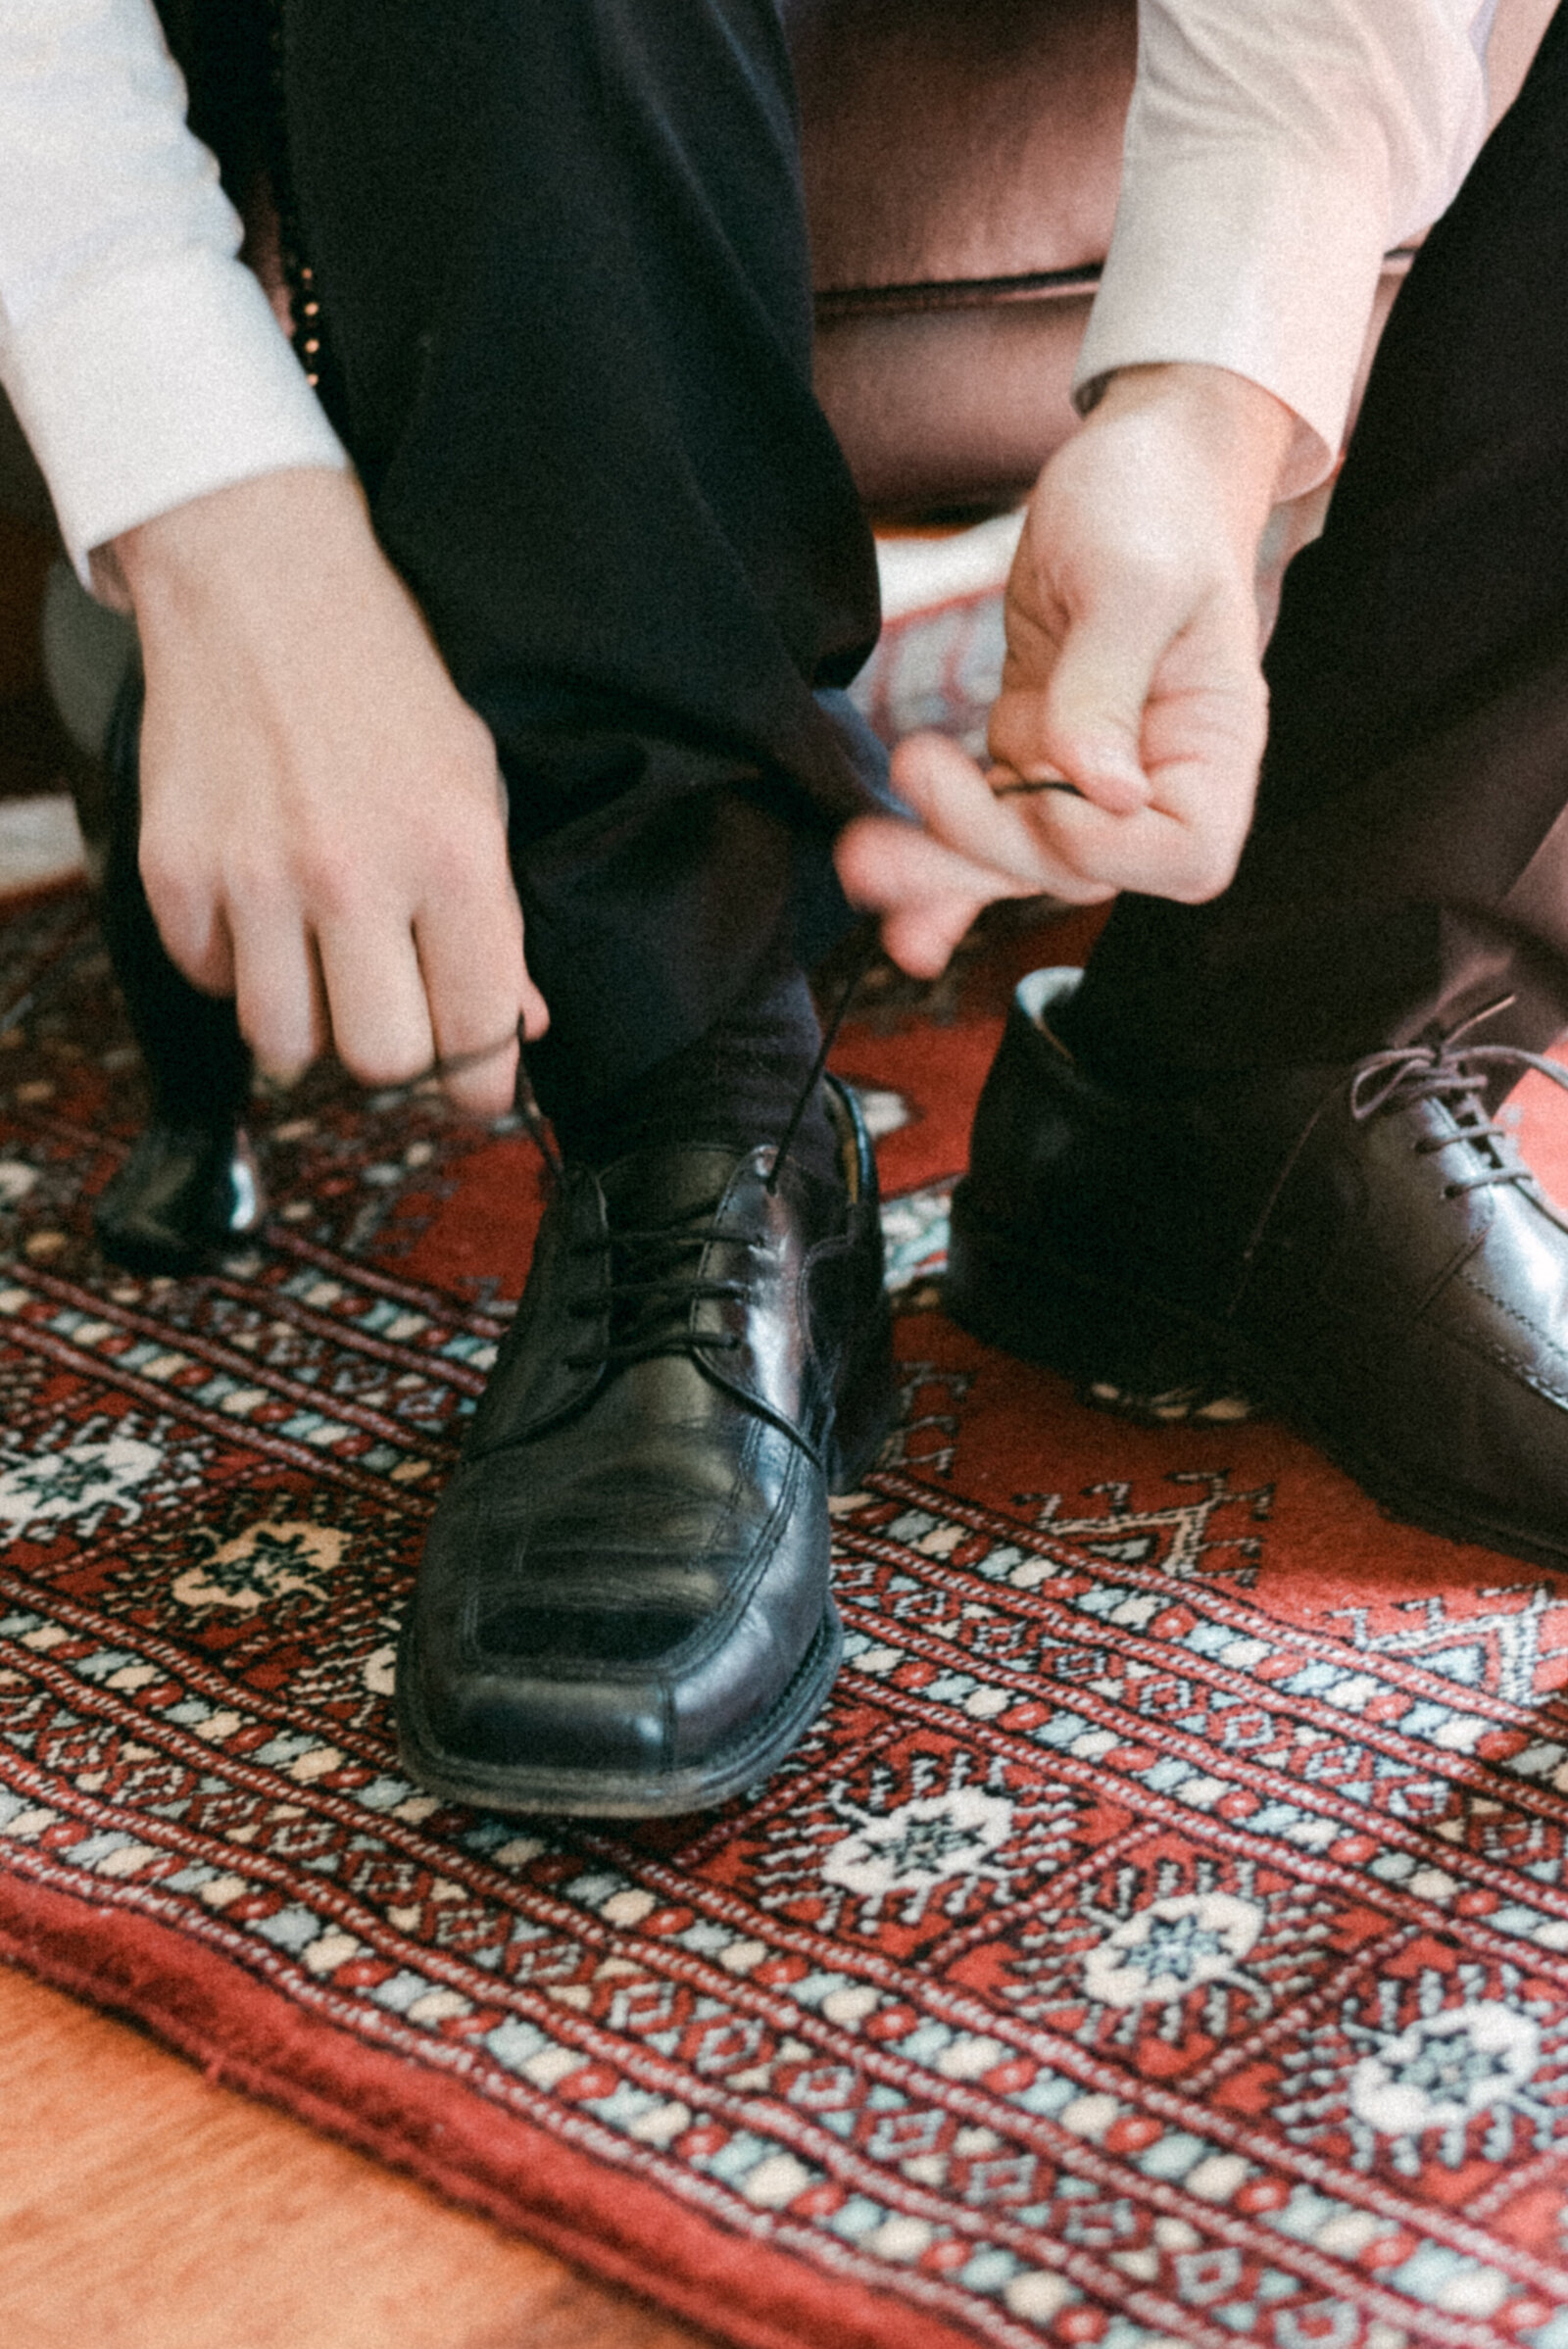 THe groom is tying his shoe laces in an image photographed by wedding photographer Hannika Gabrielsson.